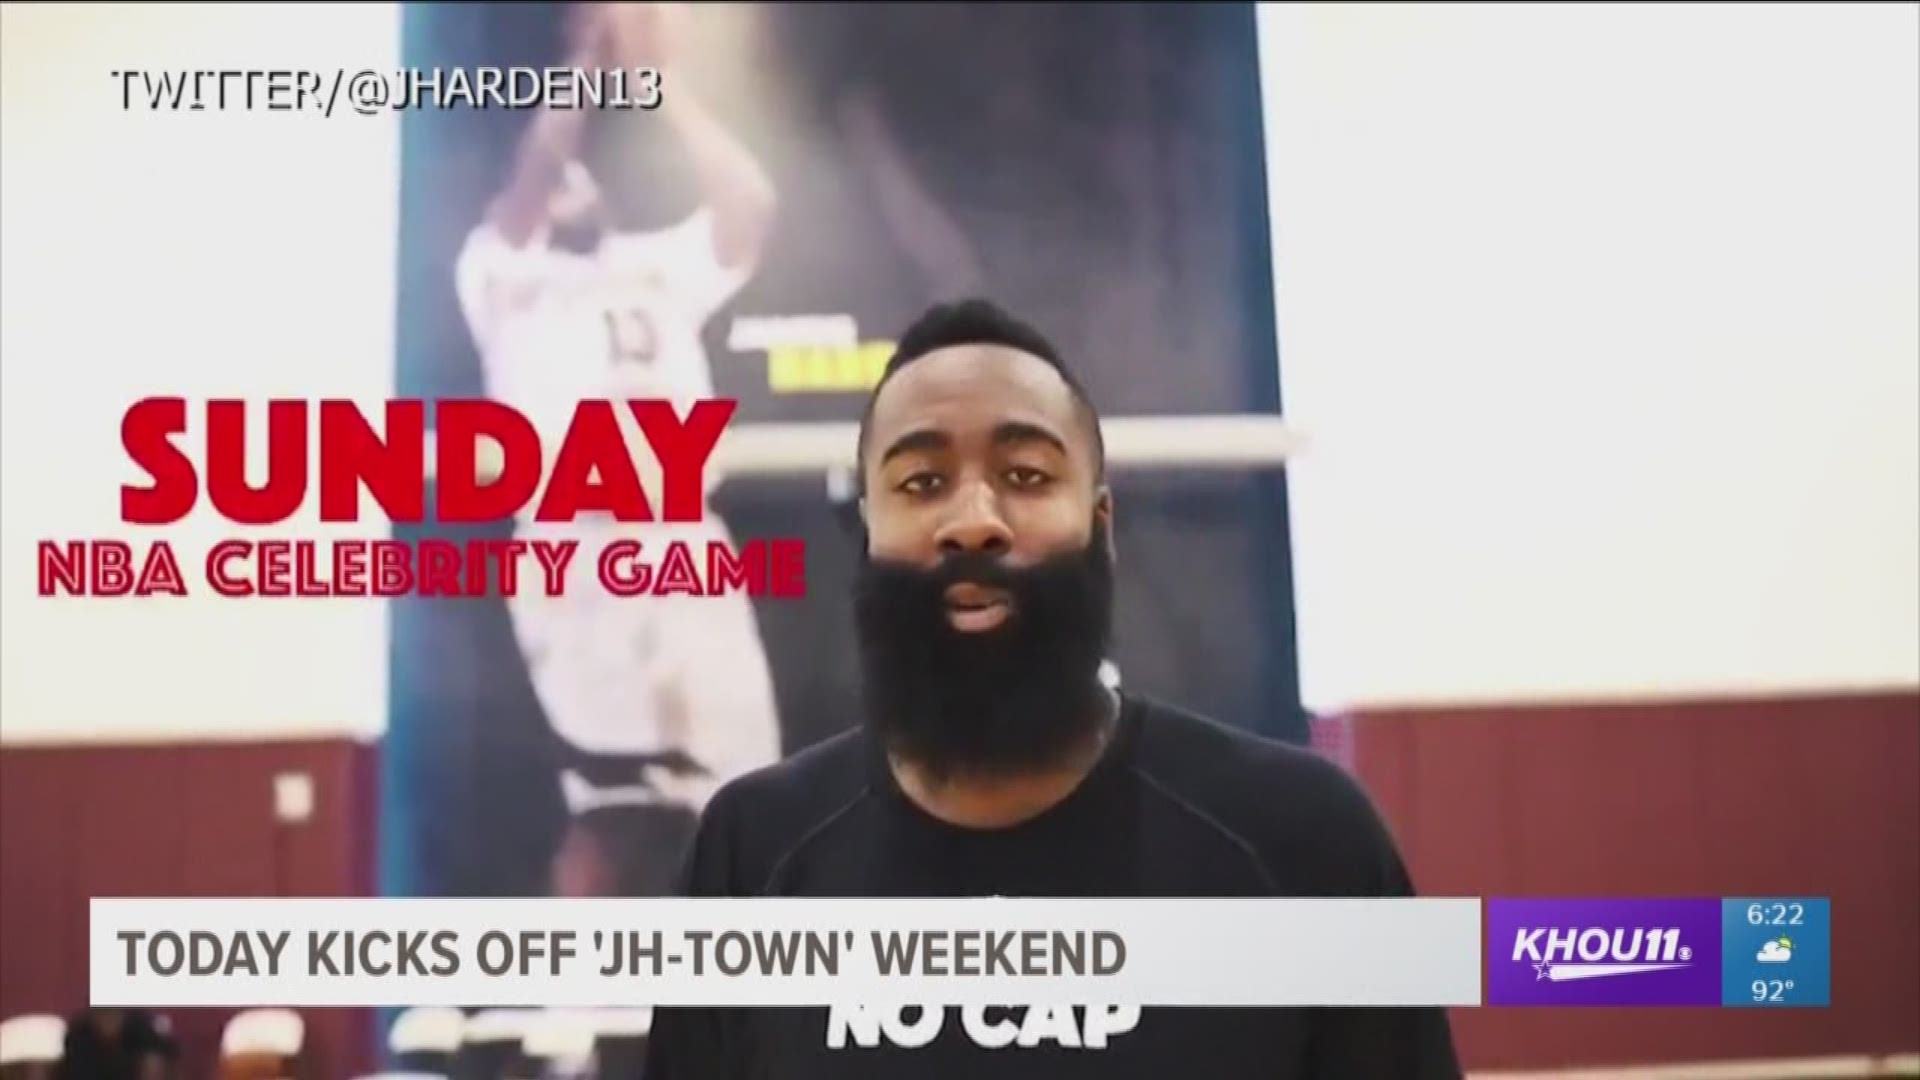 Rockets star James Harden is kicking off "JH-Town Weekend" with events set to raise money for his foundation.